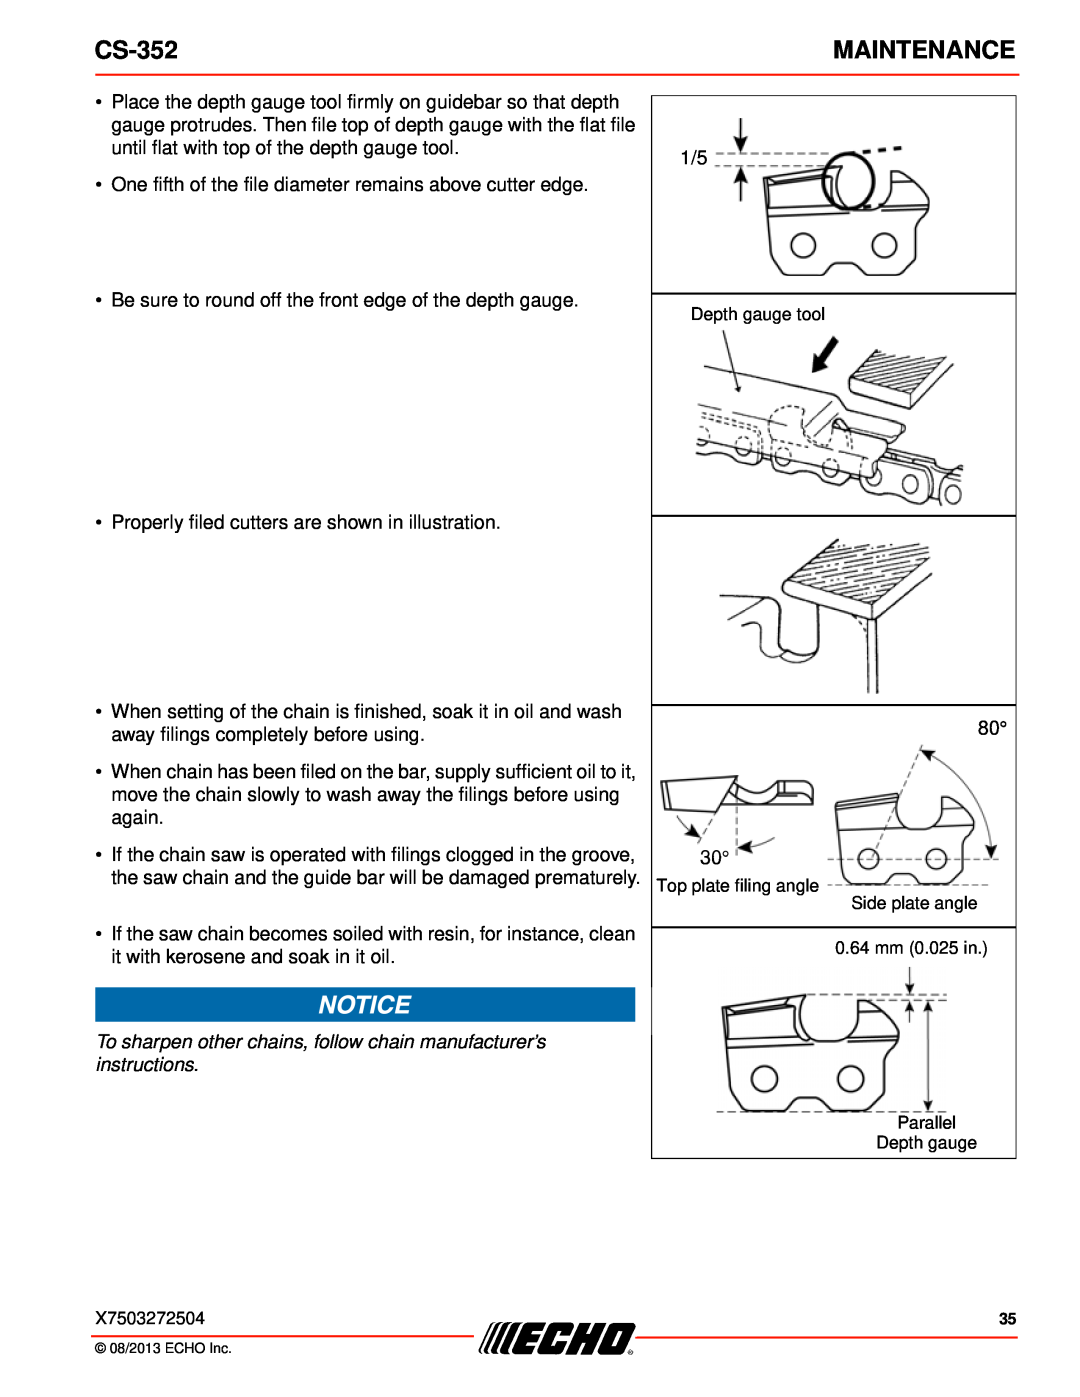 Echo CS-352 instruction manual To sharpen other chains, follow chain manufacturer’s instructions, Maintenance 